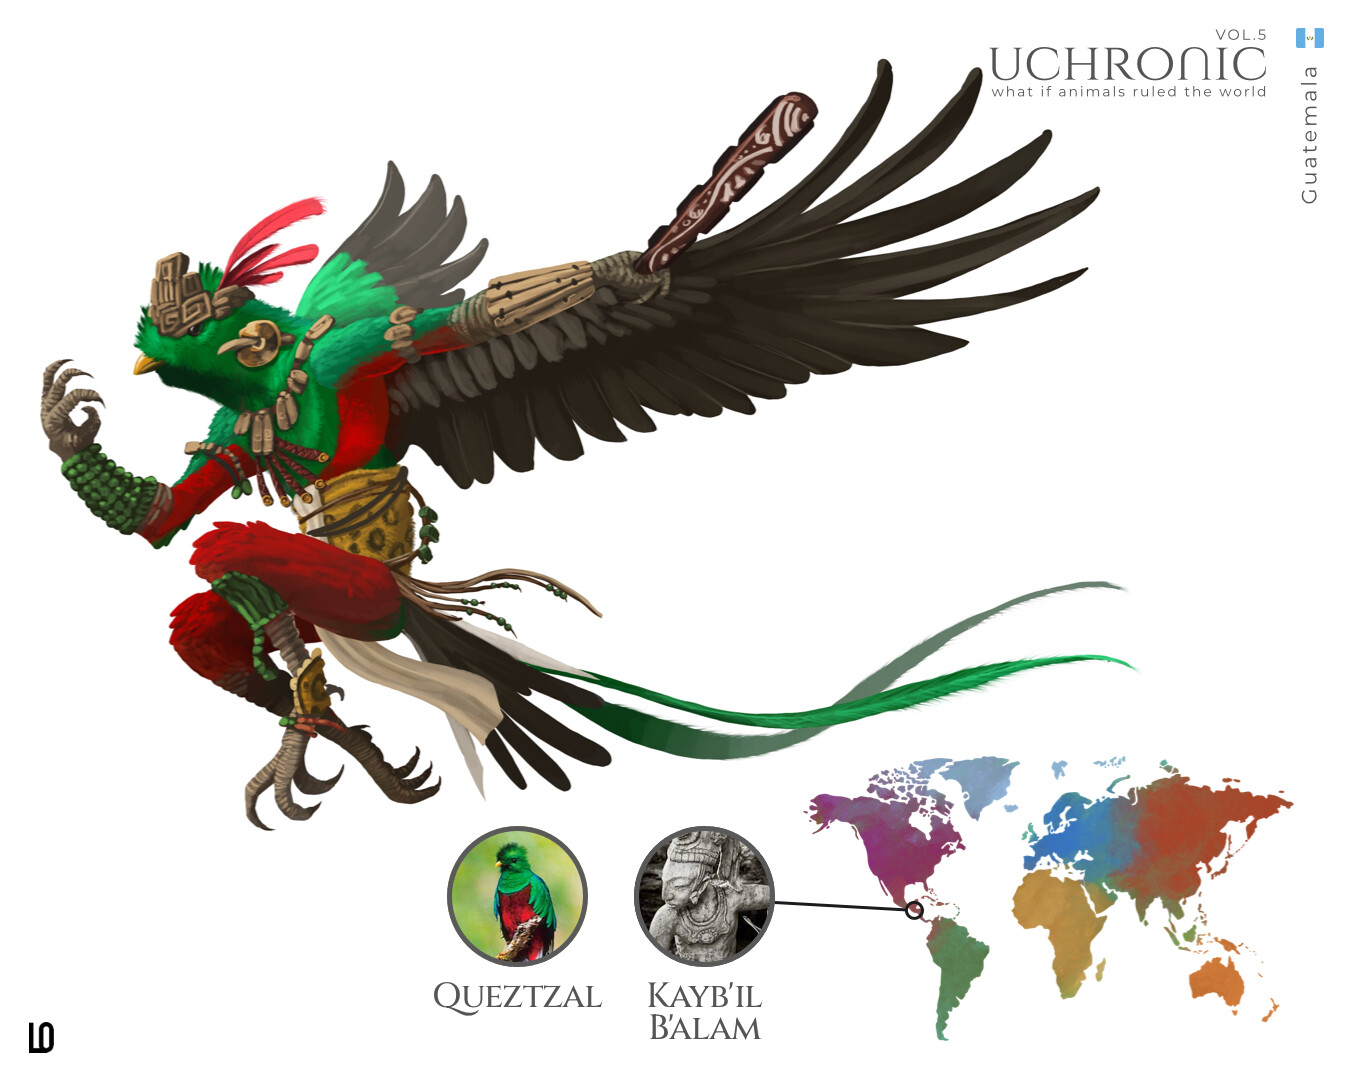 Guatemala , Kayb’il B’alam, Mayan king, from the Aquita dinasty. With a very special animal from there, the majestic Quetzal.